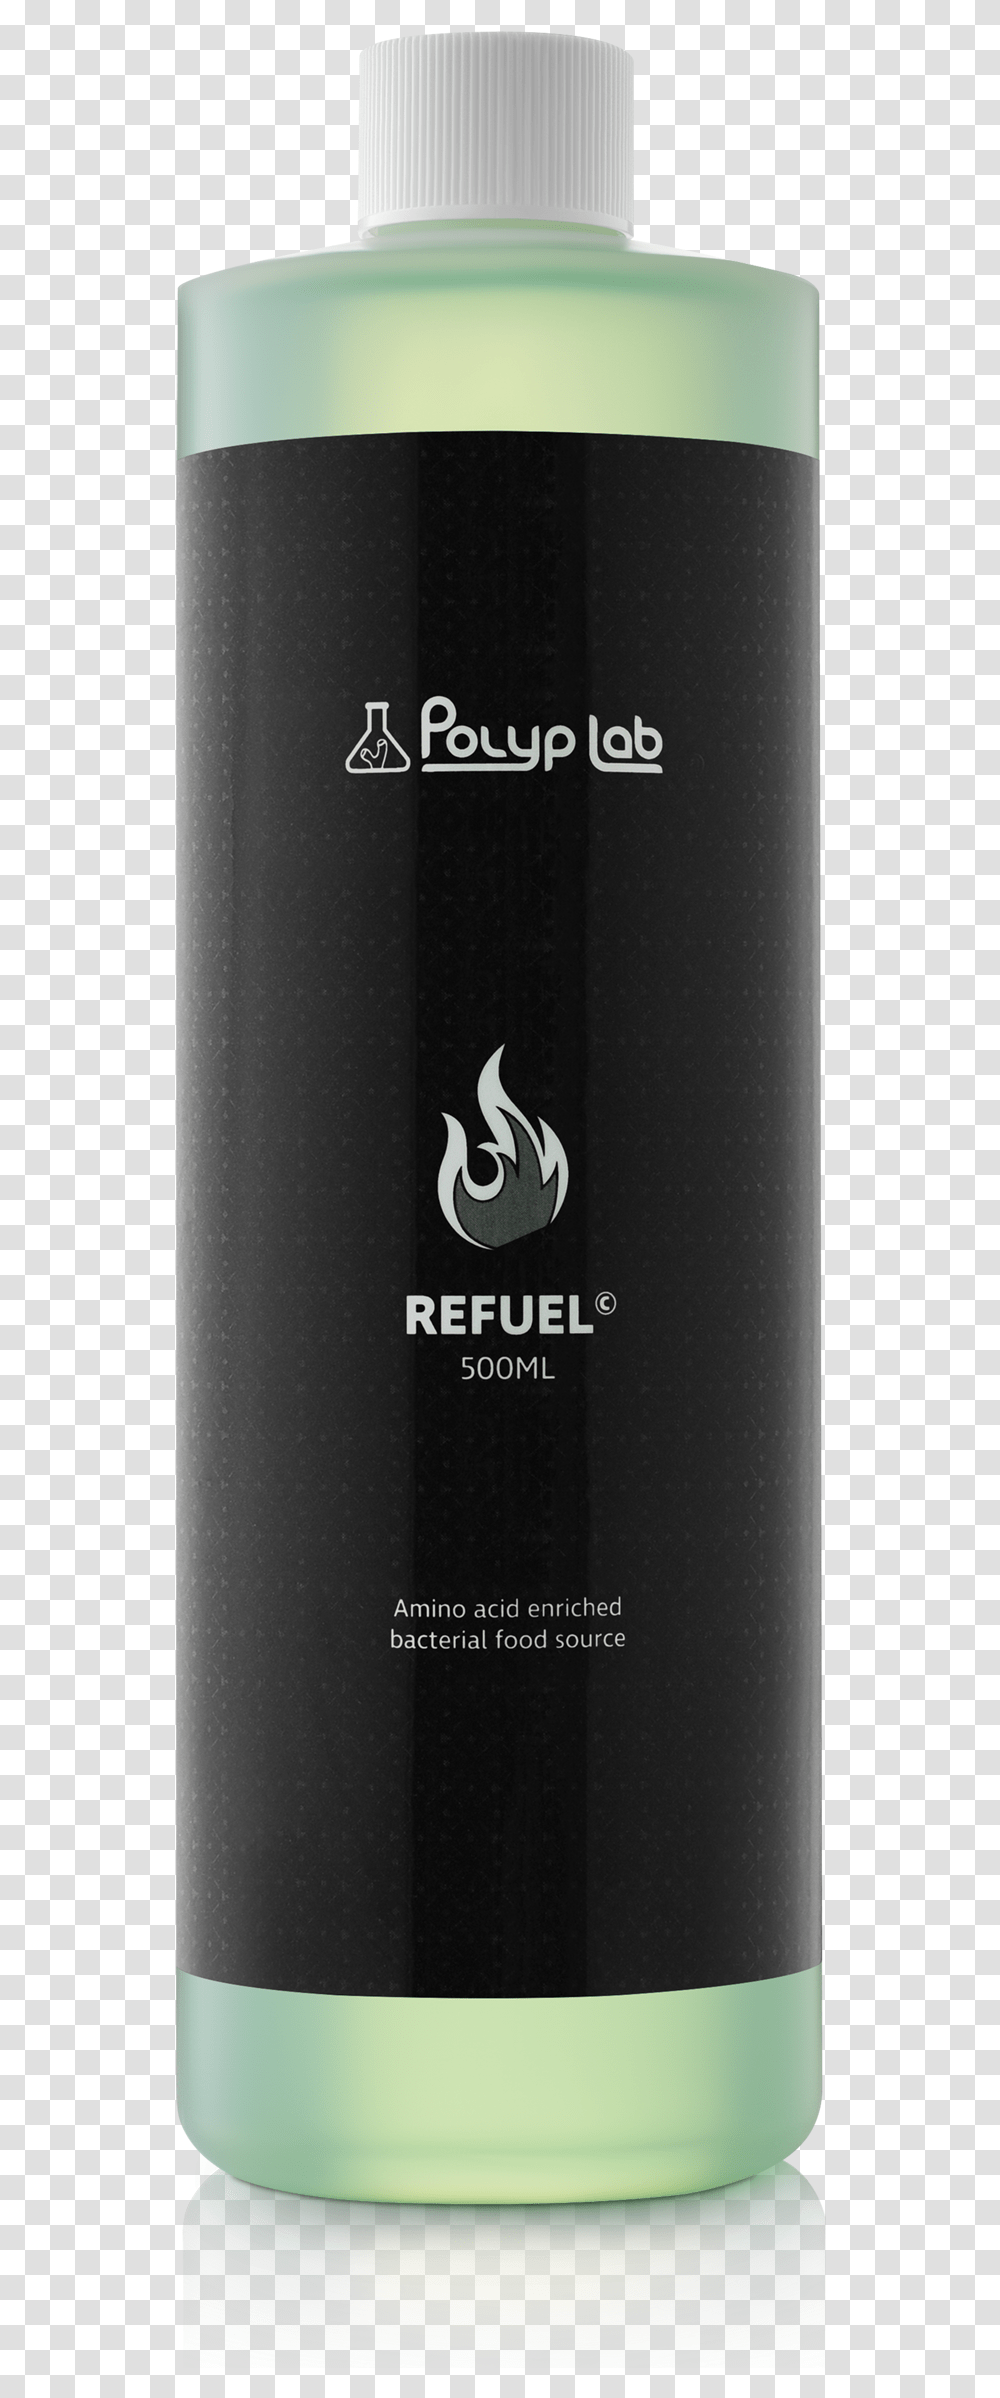 Refuel Bottle, Tin, Can, Beer, Alcohol Transparent Png